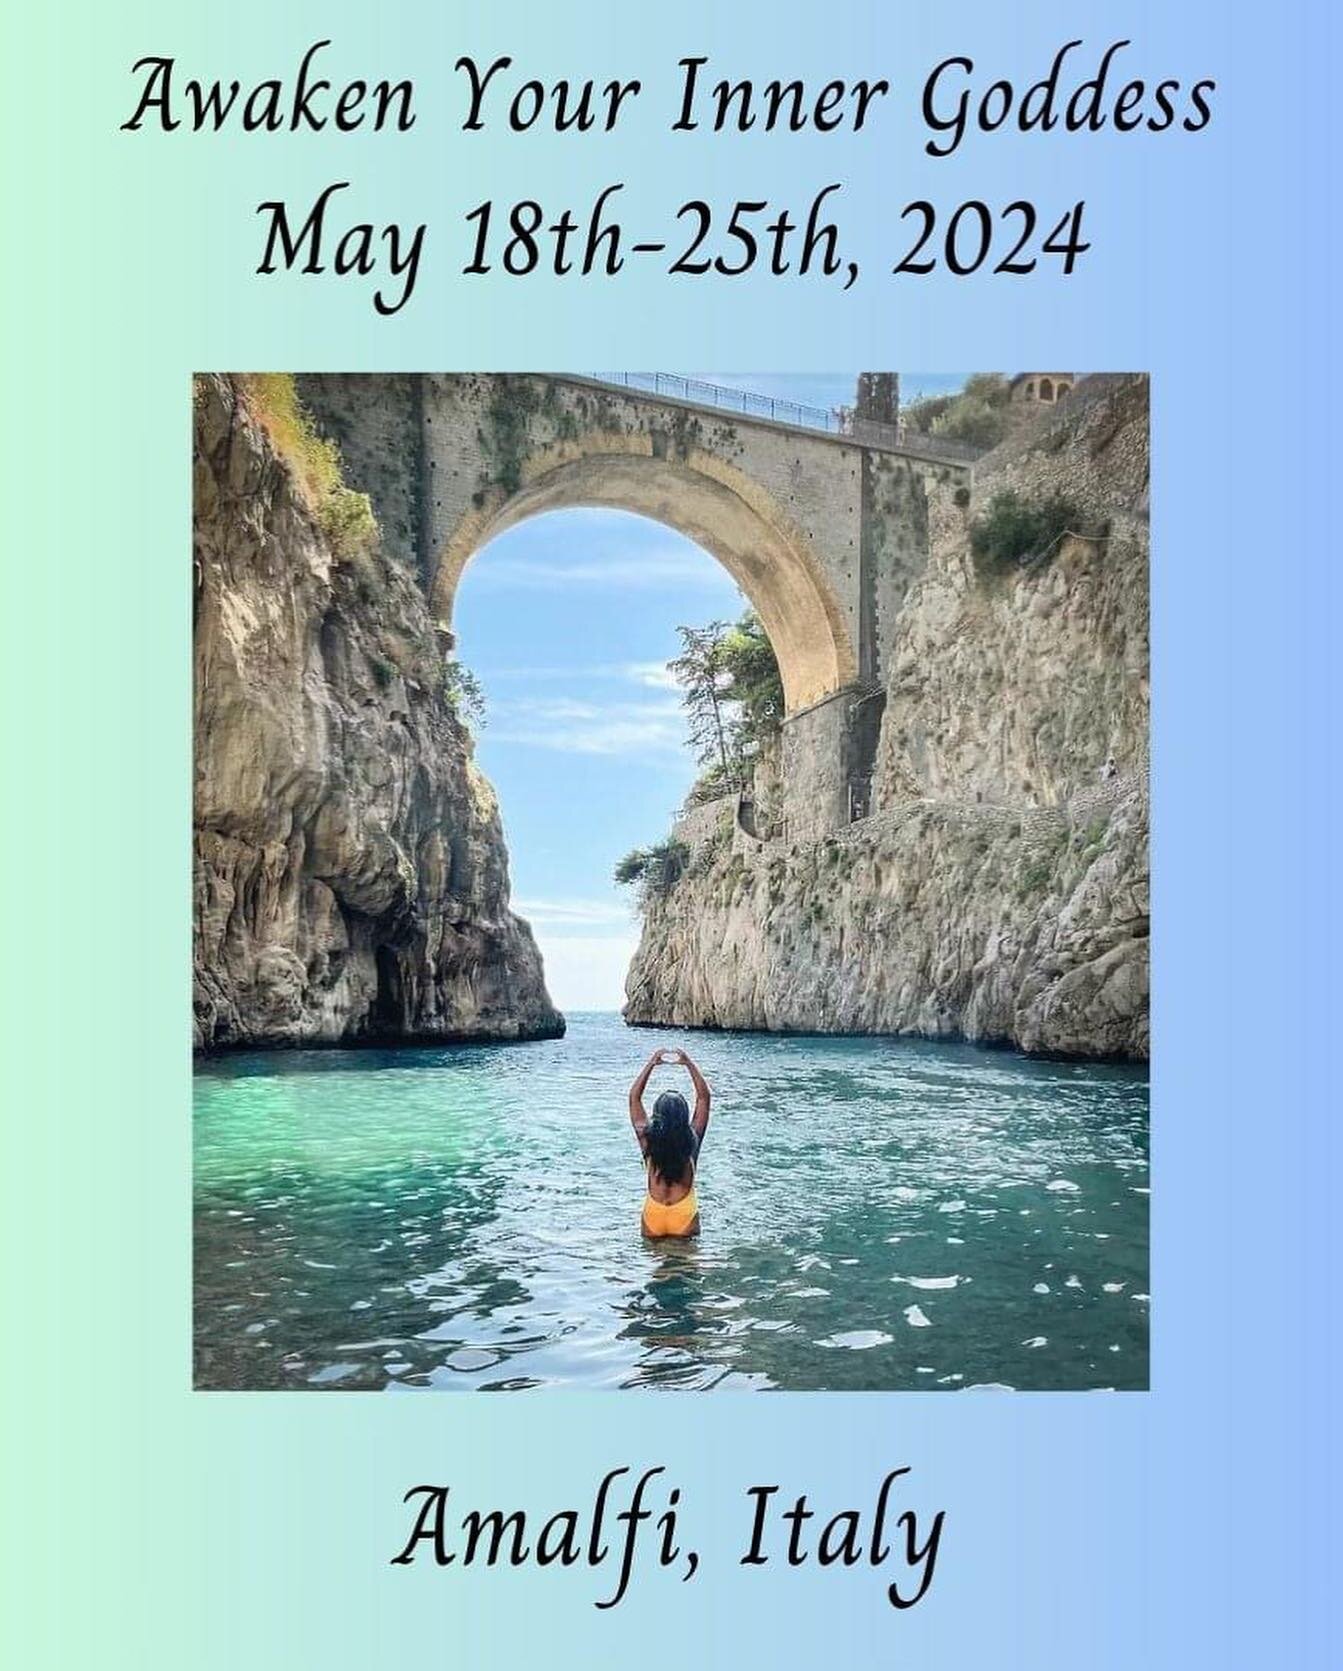 Join @theholdingspacecenter and myself for this once in a lifetime retreat experience for 7 nights and 8 days in Amalfi, Italy! YES I SAID ITALY!!!! 🇮🇹 

Calling all women who WANT a powerful transformation in their lives&hellip;

Hi! You, yes you!